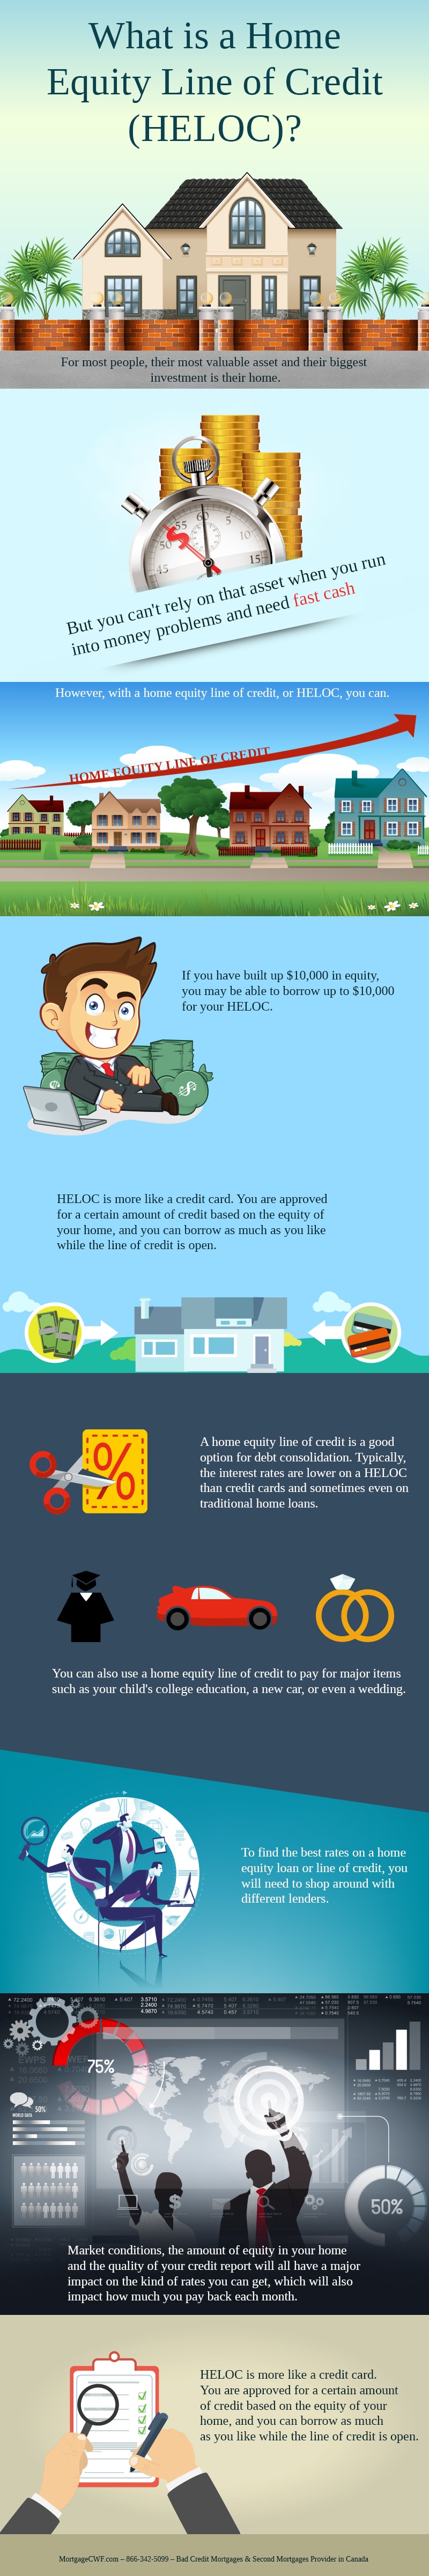 What is a Home Equity Line of Credit - Infographic